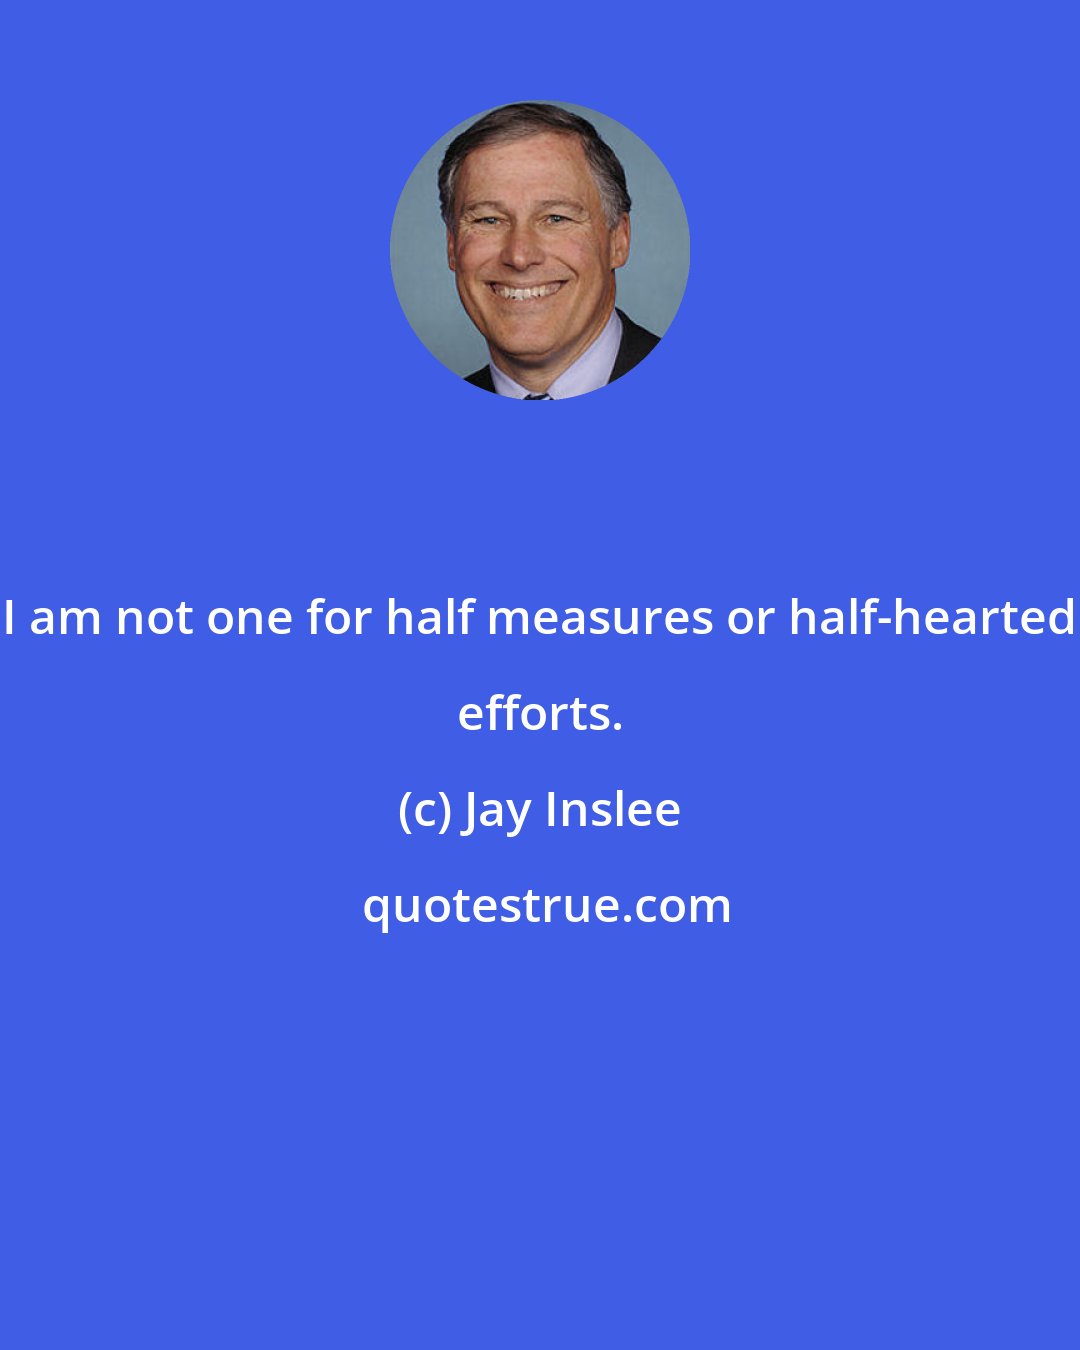 Jay Inslee: I am not one for half measures or half-hearted efforts.